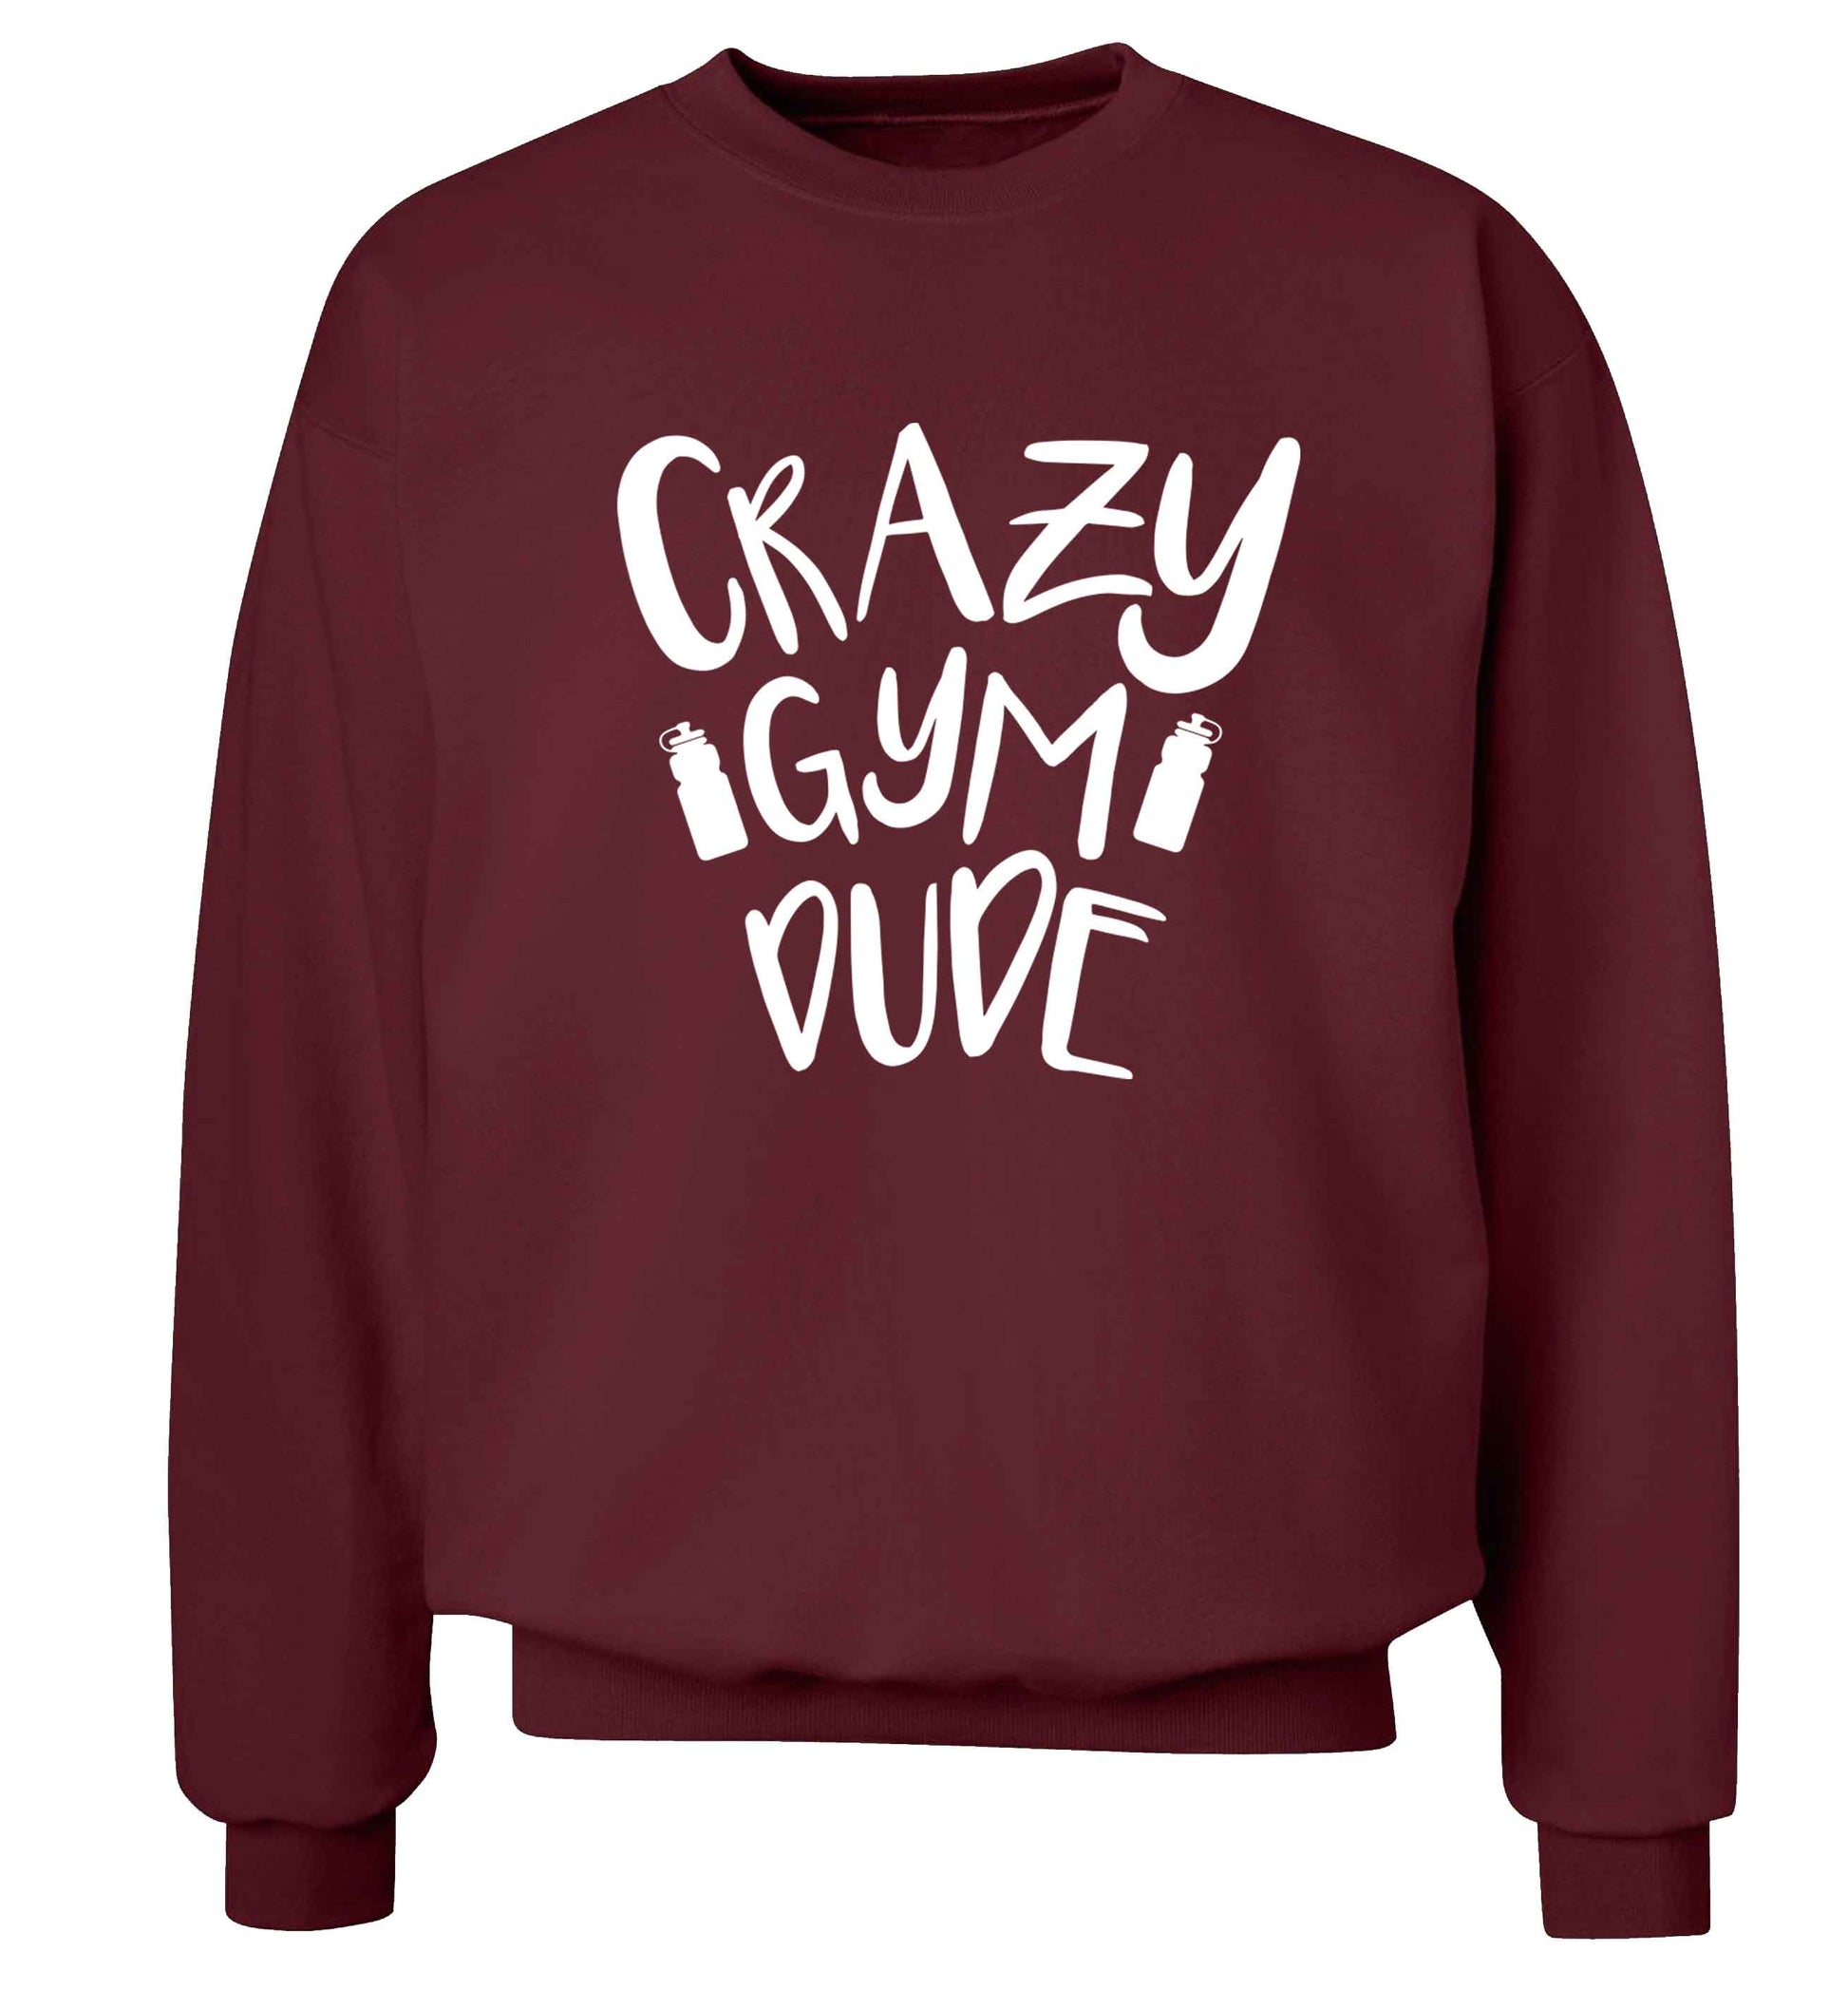 Crazy gym dude Adult's unisex maroon Sweater 2XL